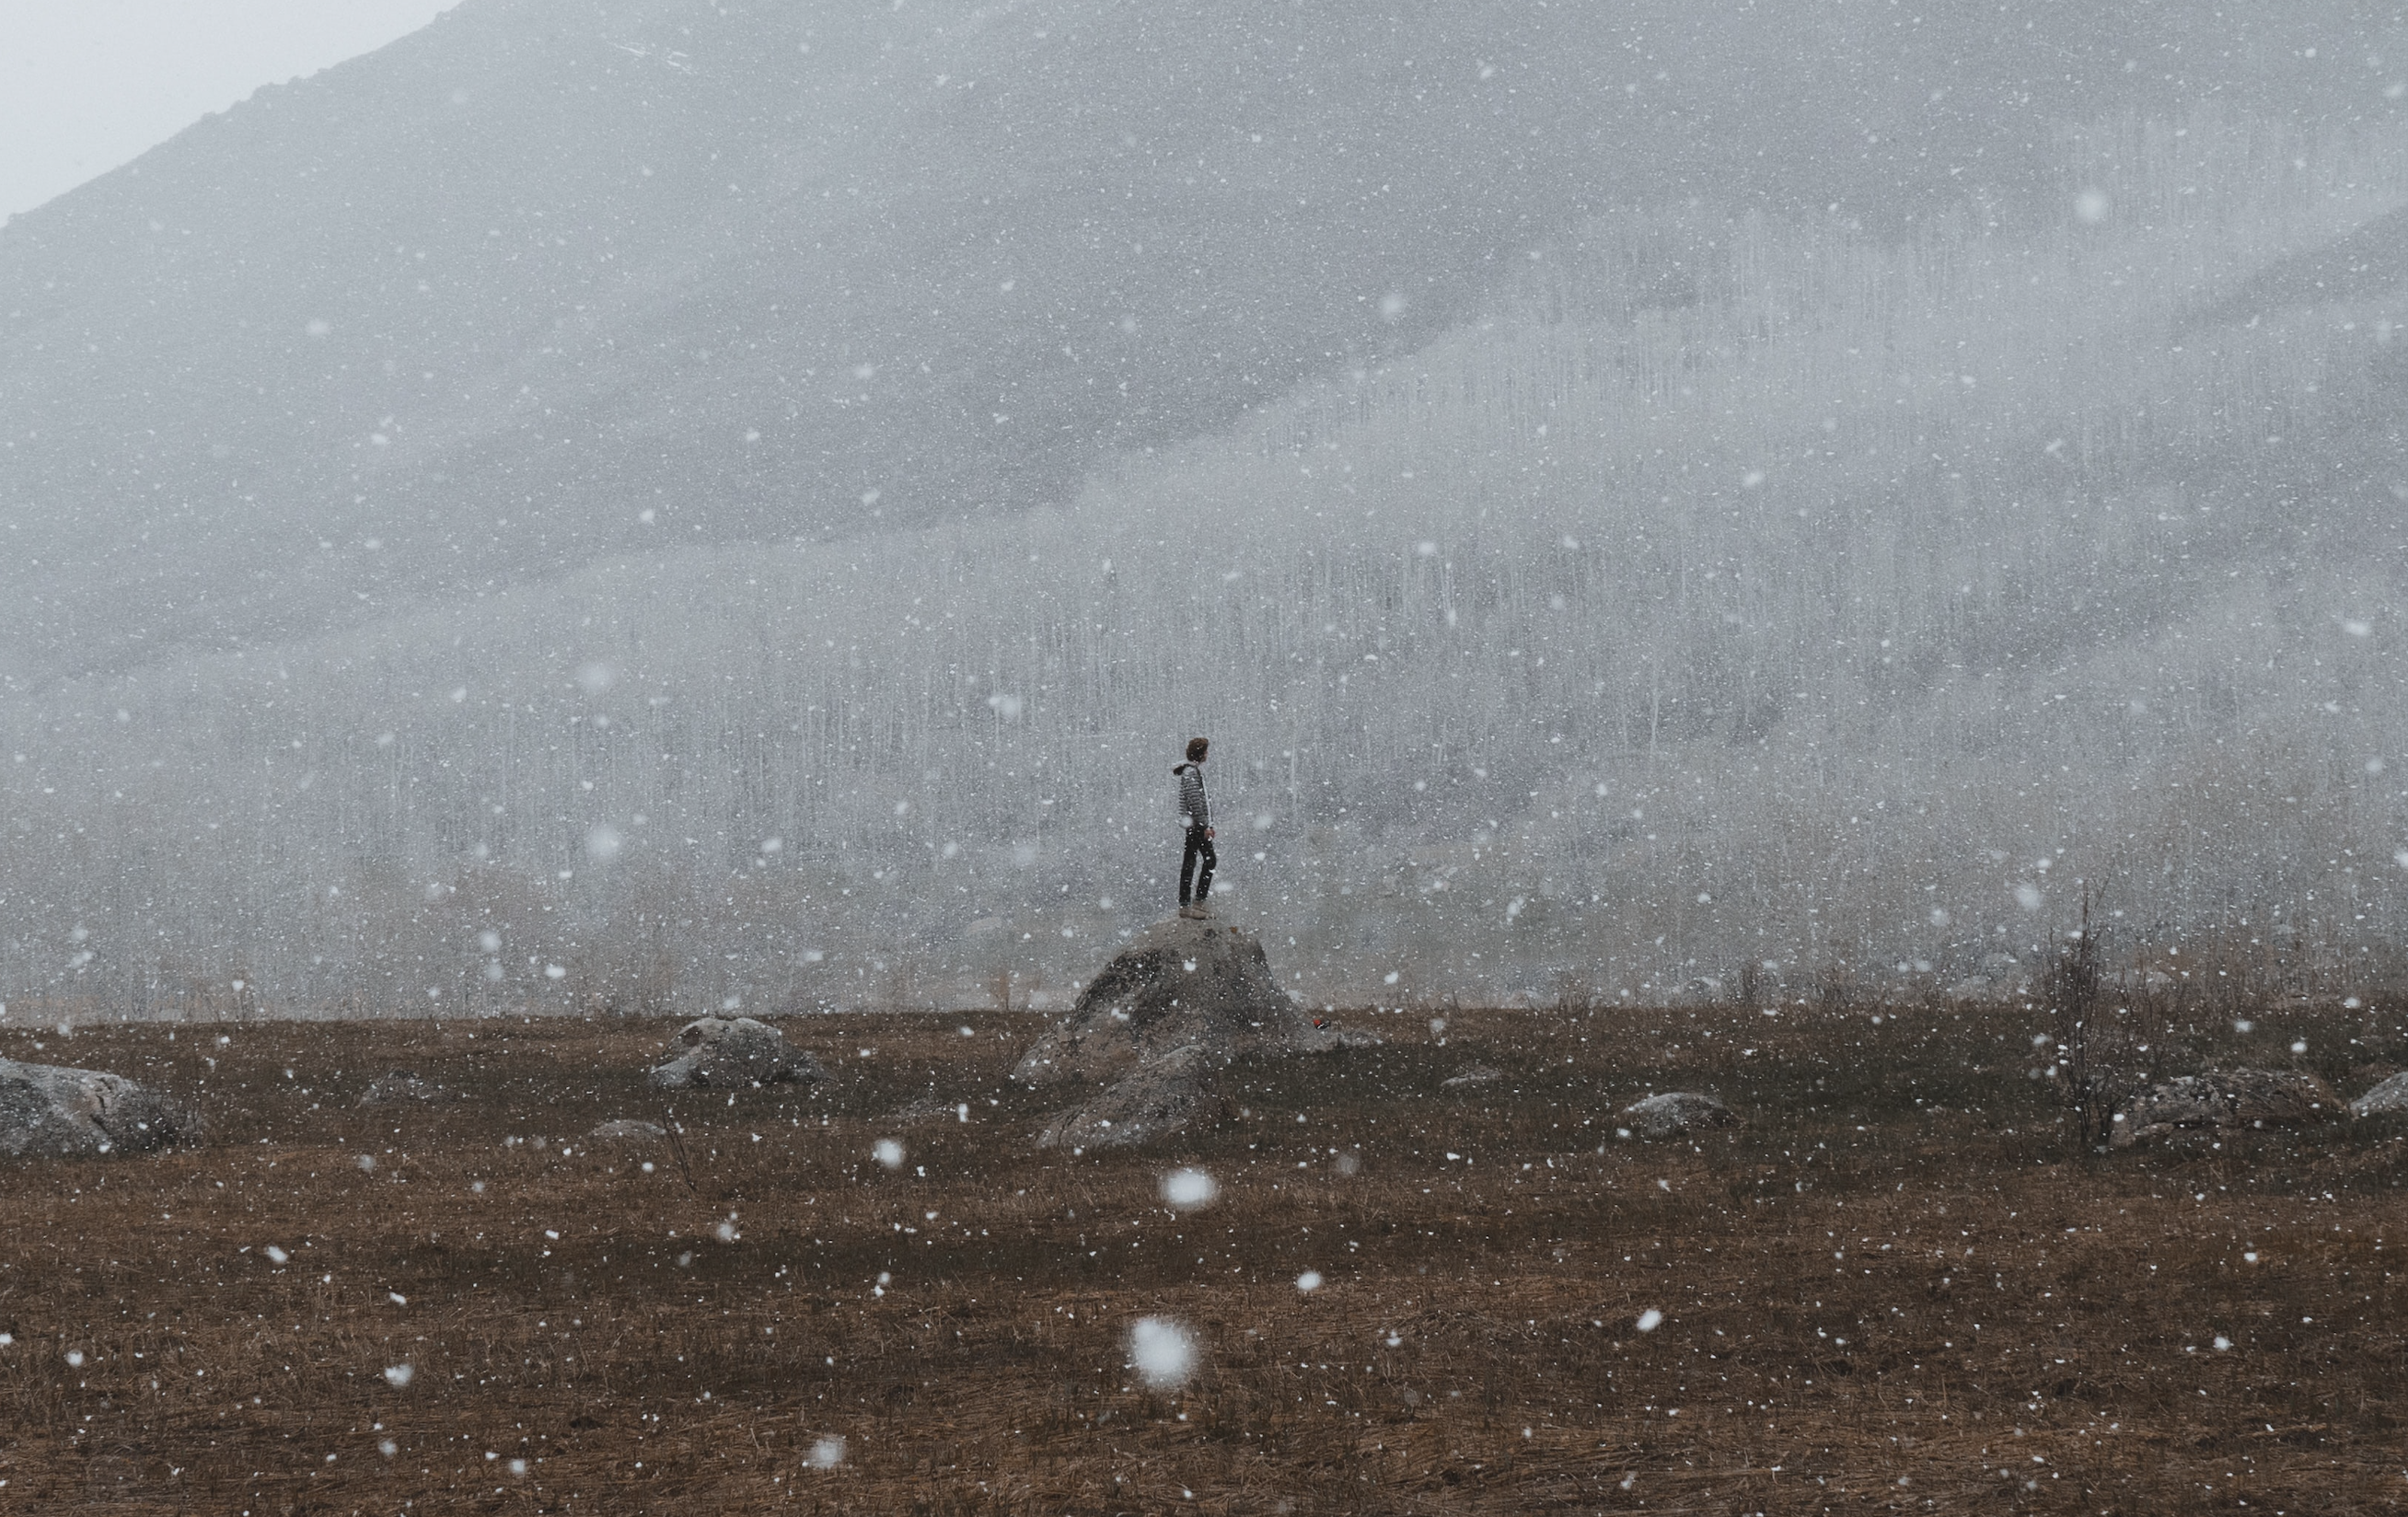 Man standing in a snowy field | Photo by Hunter Bryant on Unsplash